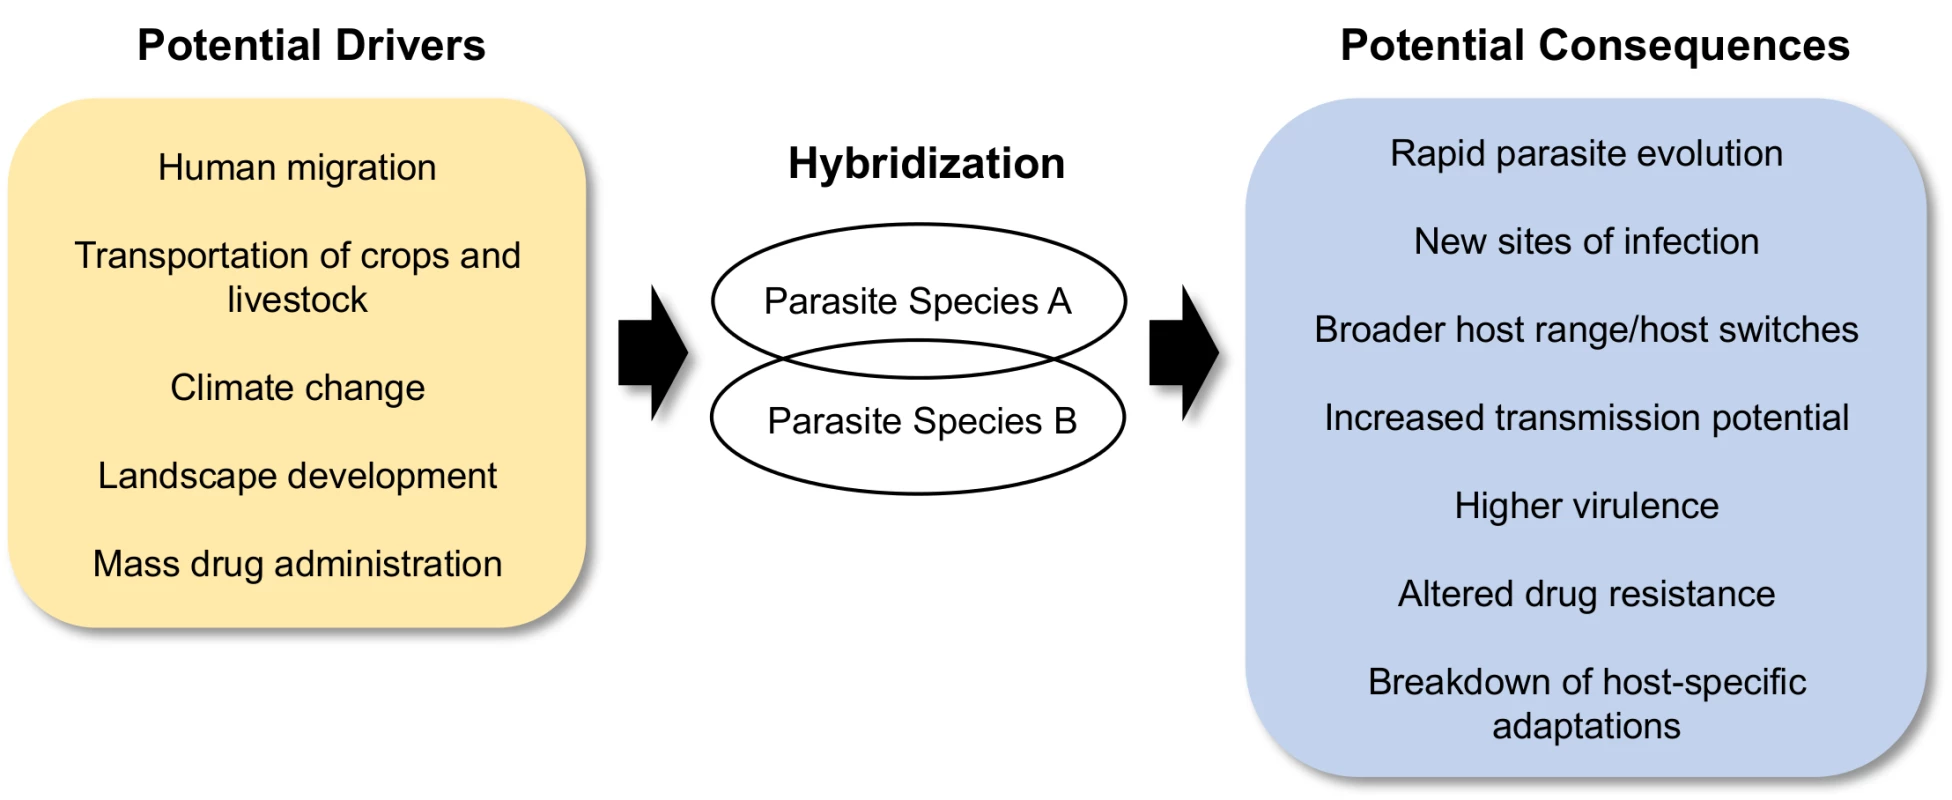 Schematic of the drivers and consequences of parasite hybridization.